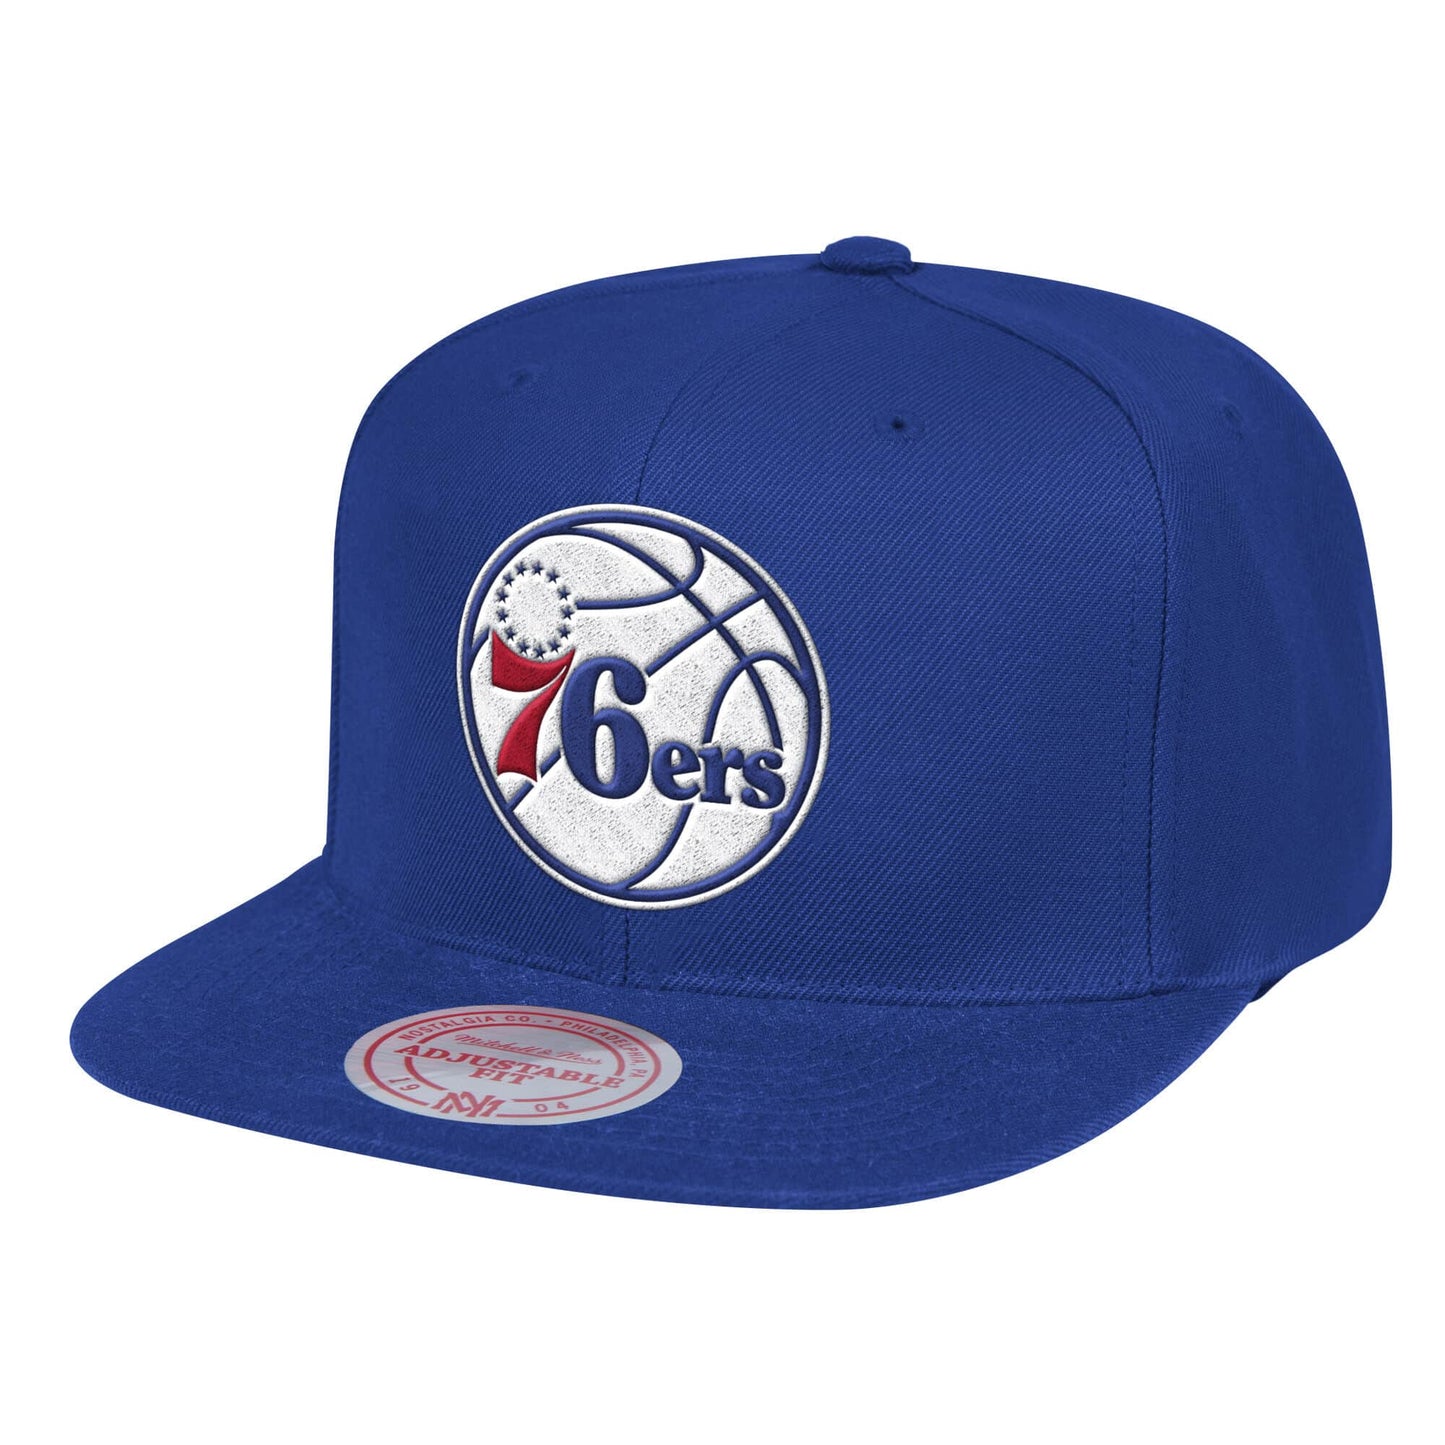 Mens NBA Philadelphia 76ers Royal Team Ground Snapback Hat By Mitchell And Ness